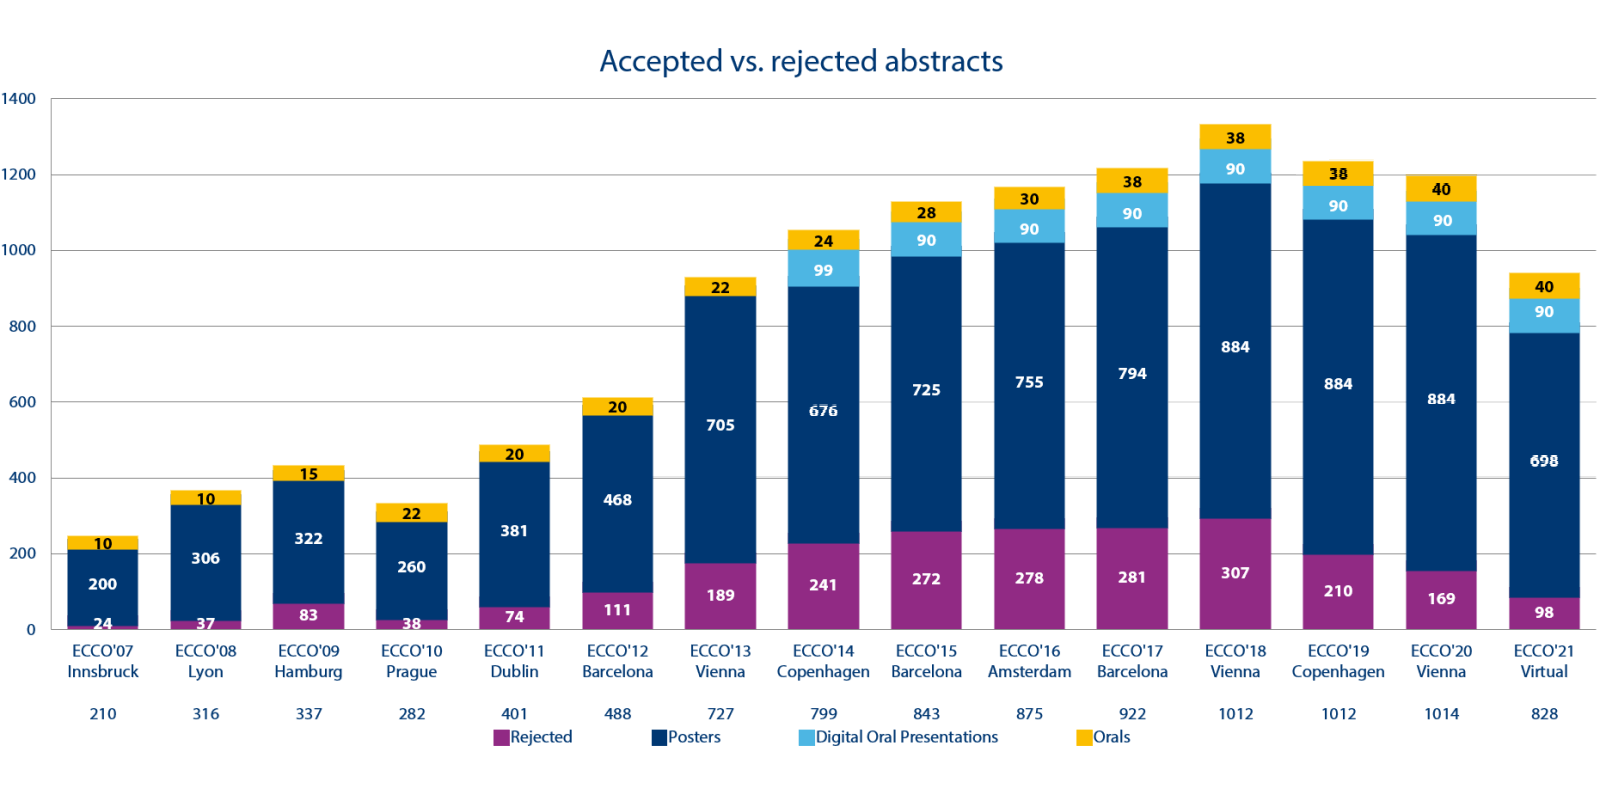 2021 Abstracts accepted vs rejected